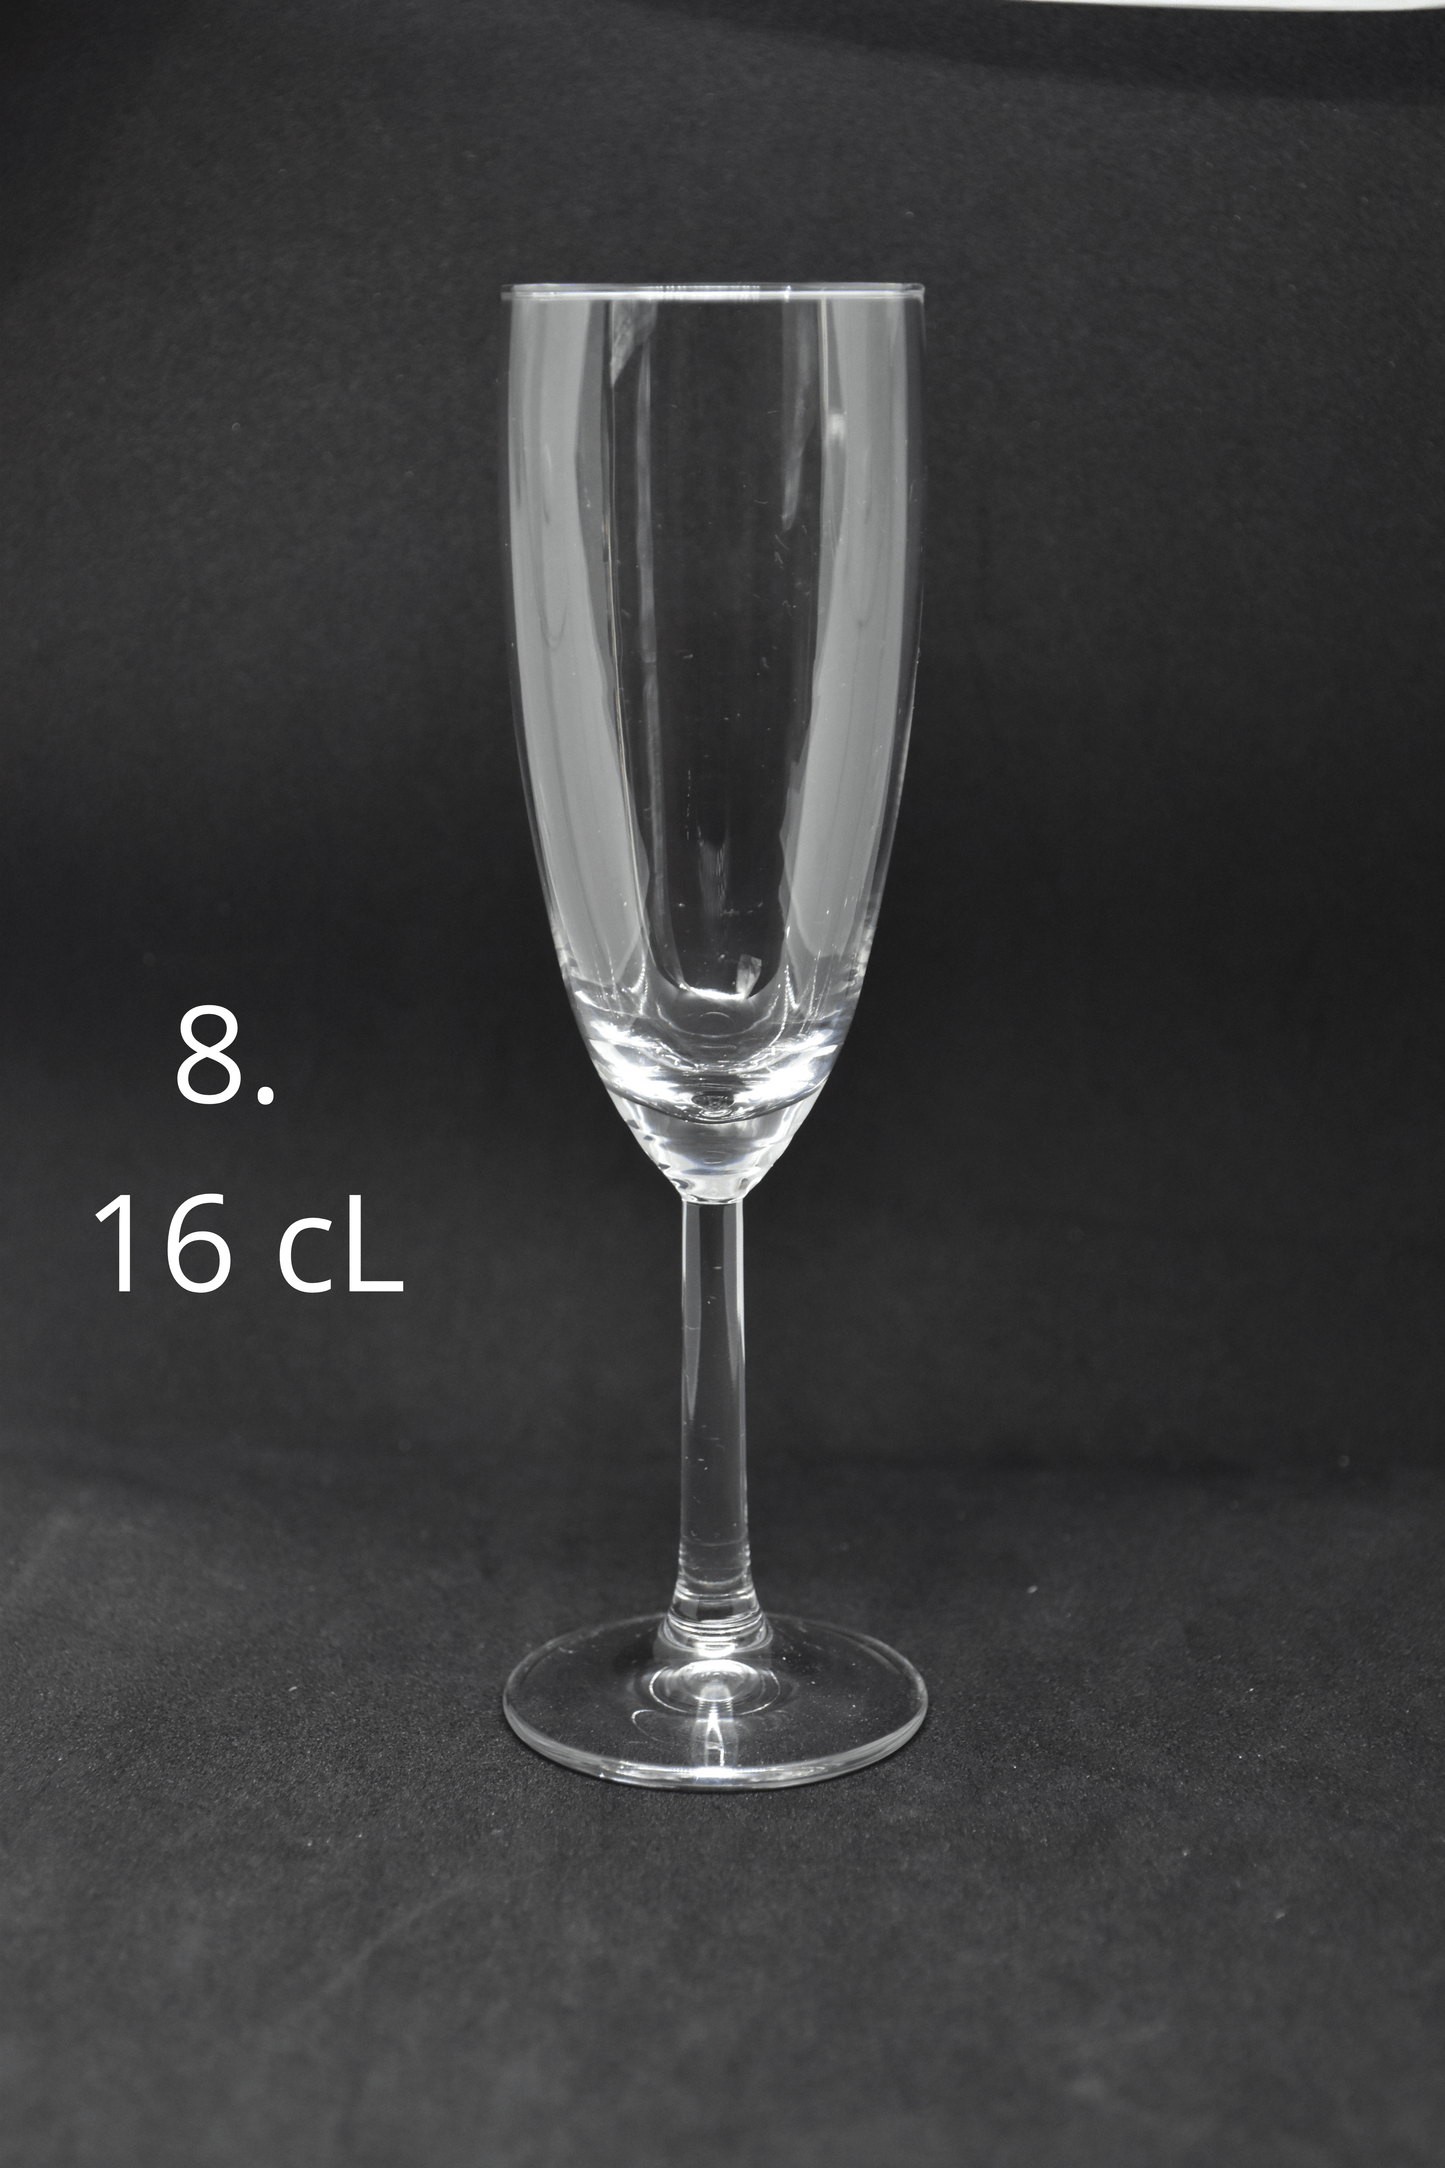 Artificer - Dungeons & Dragons Classes Engraved Glasses